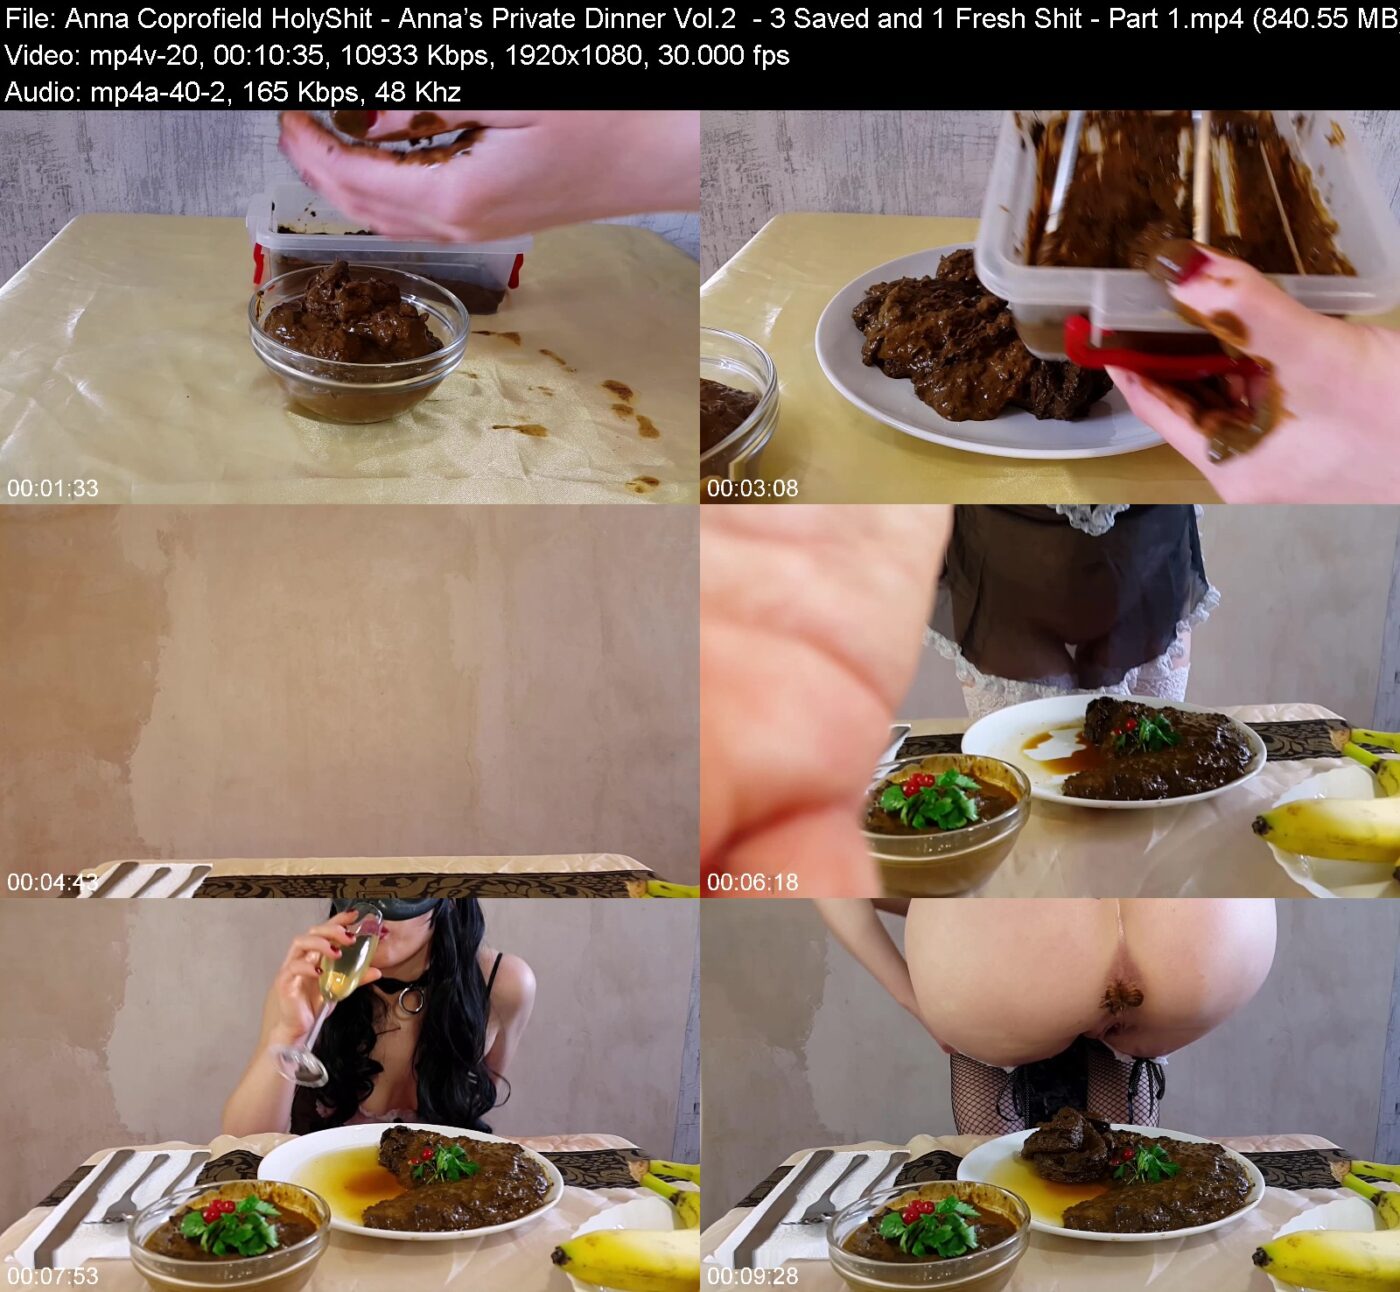 Anna Coprofield HolyShit - Anna's Private Dinner Vol.2  - 3 Saved and 1 Fresh Shit - Part 1